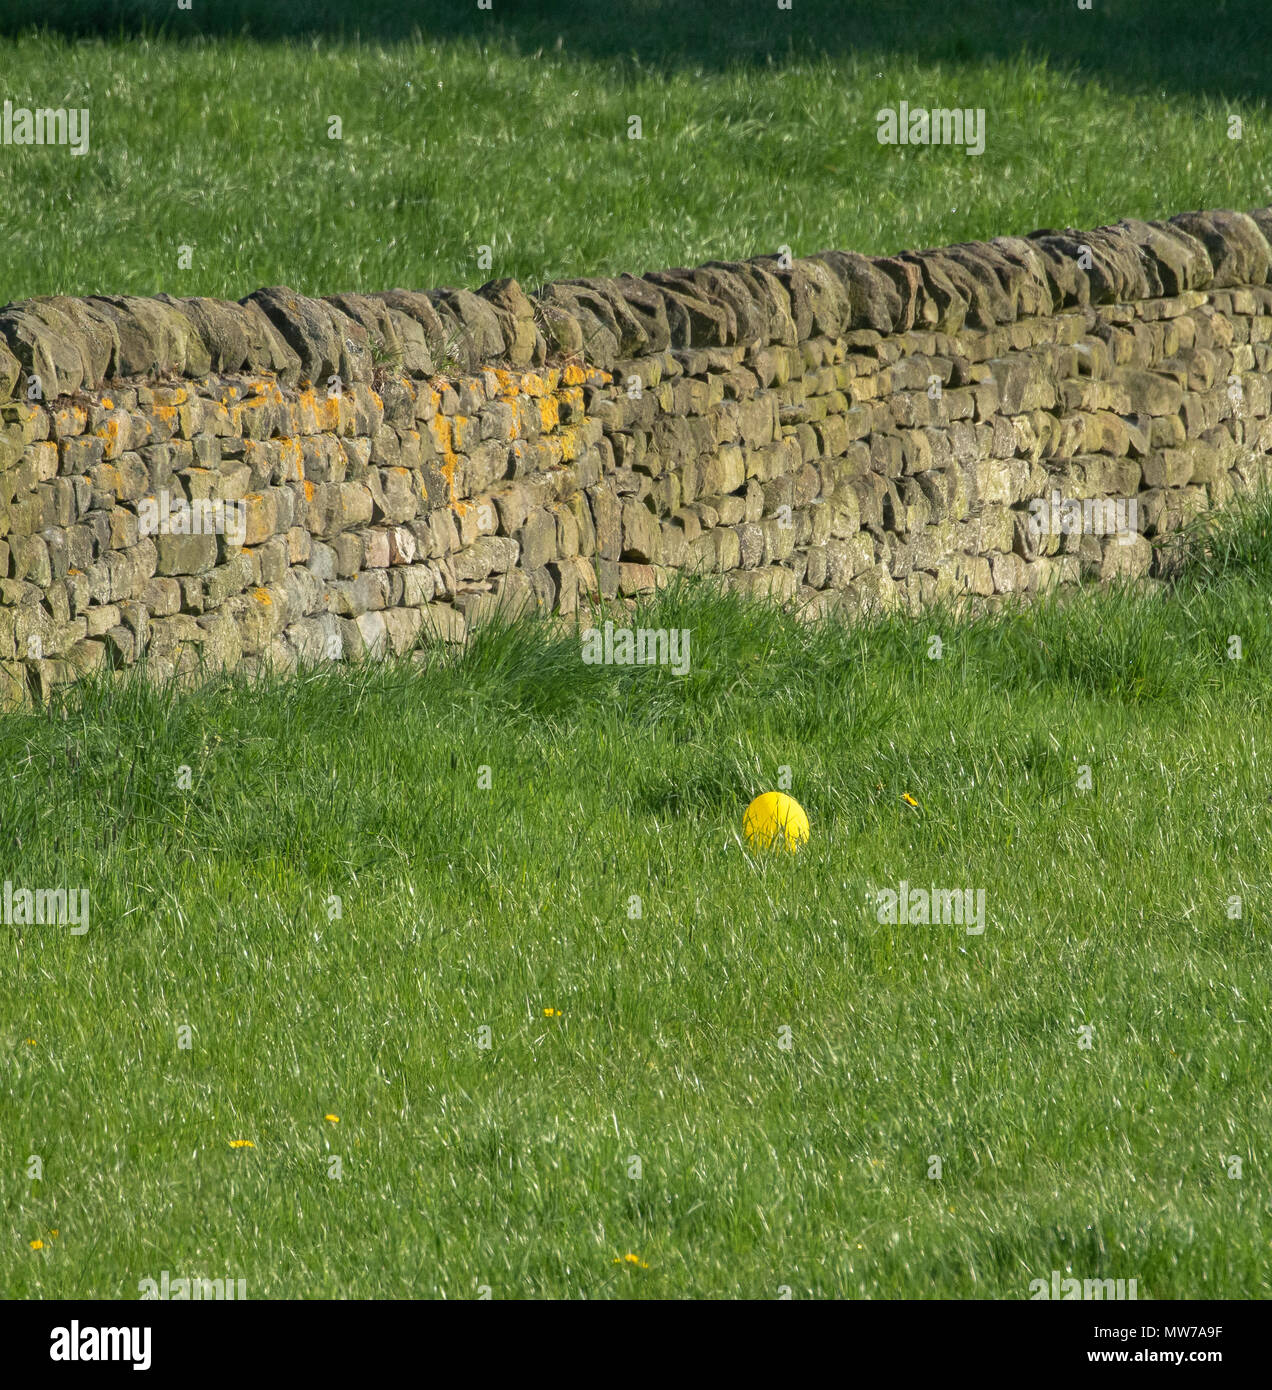 Balloon litter. A balloon has landed in a field. Released balloons can have a destructive effects  on animals, people, and the environment. Stock Photo